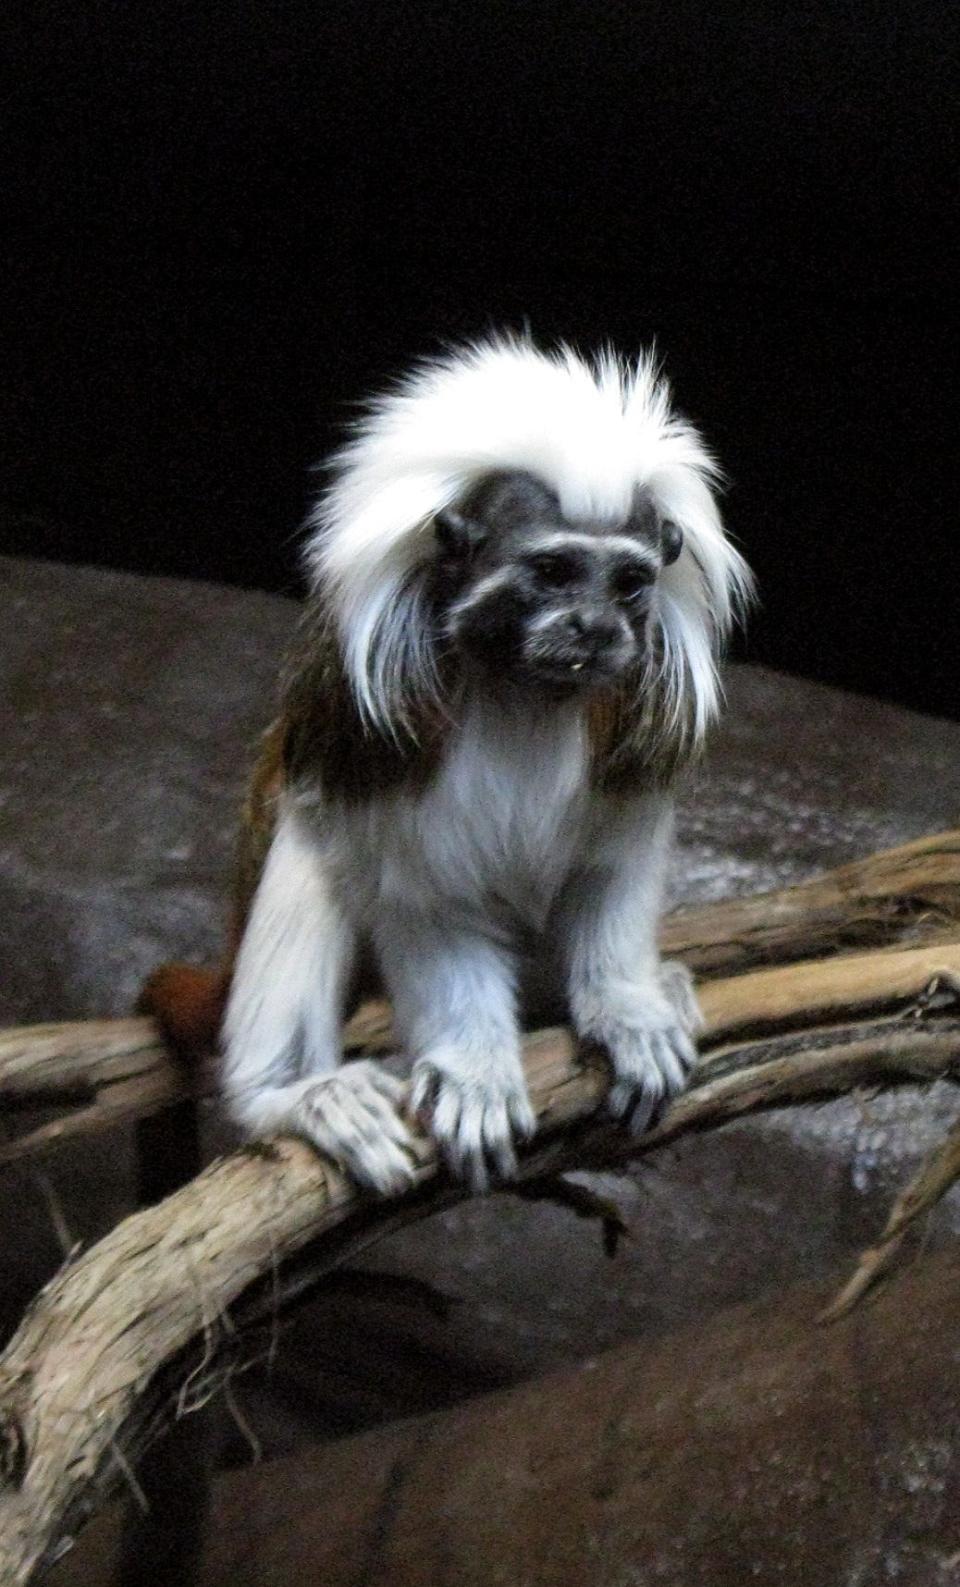 In this O-D file photo, one of the Utica Zoo's cotton-top tamarins sits in its exhibit shortly after it opened in 2009.